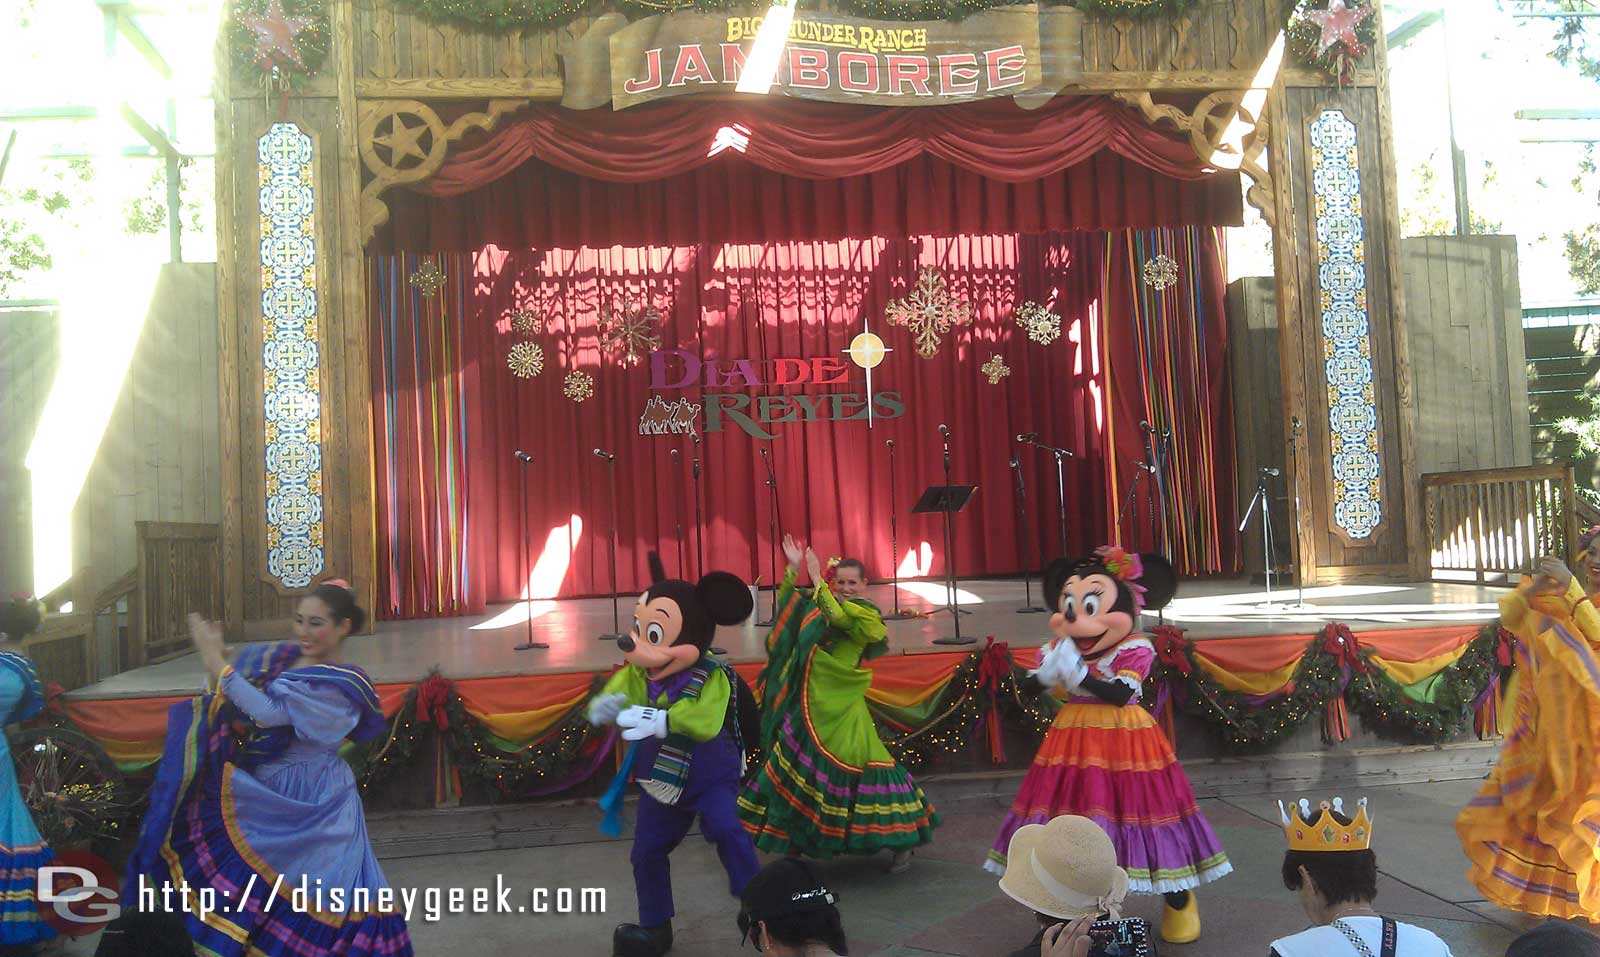 The Fiesta Street Party featuring Mickey and Minnie